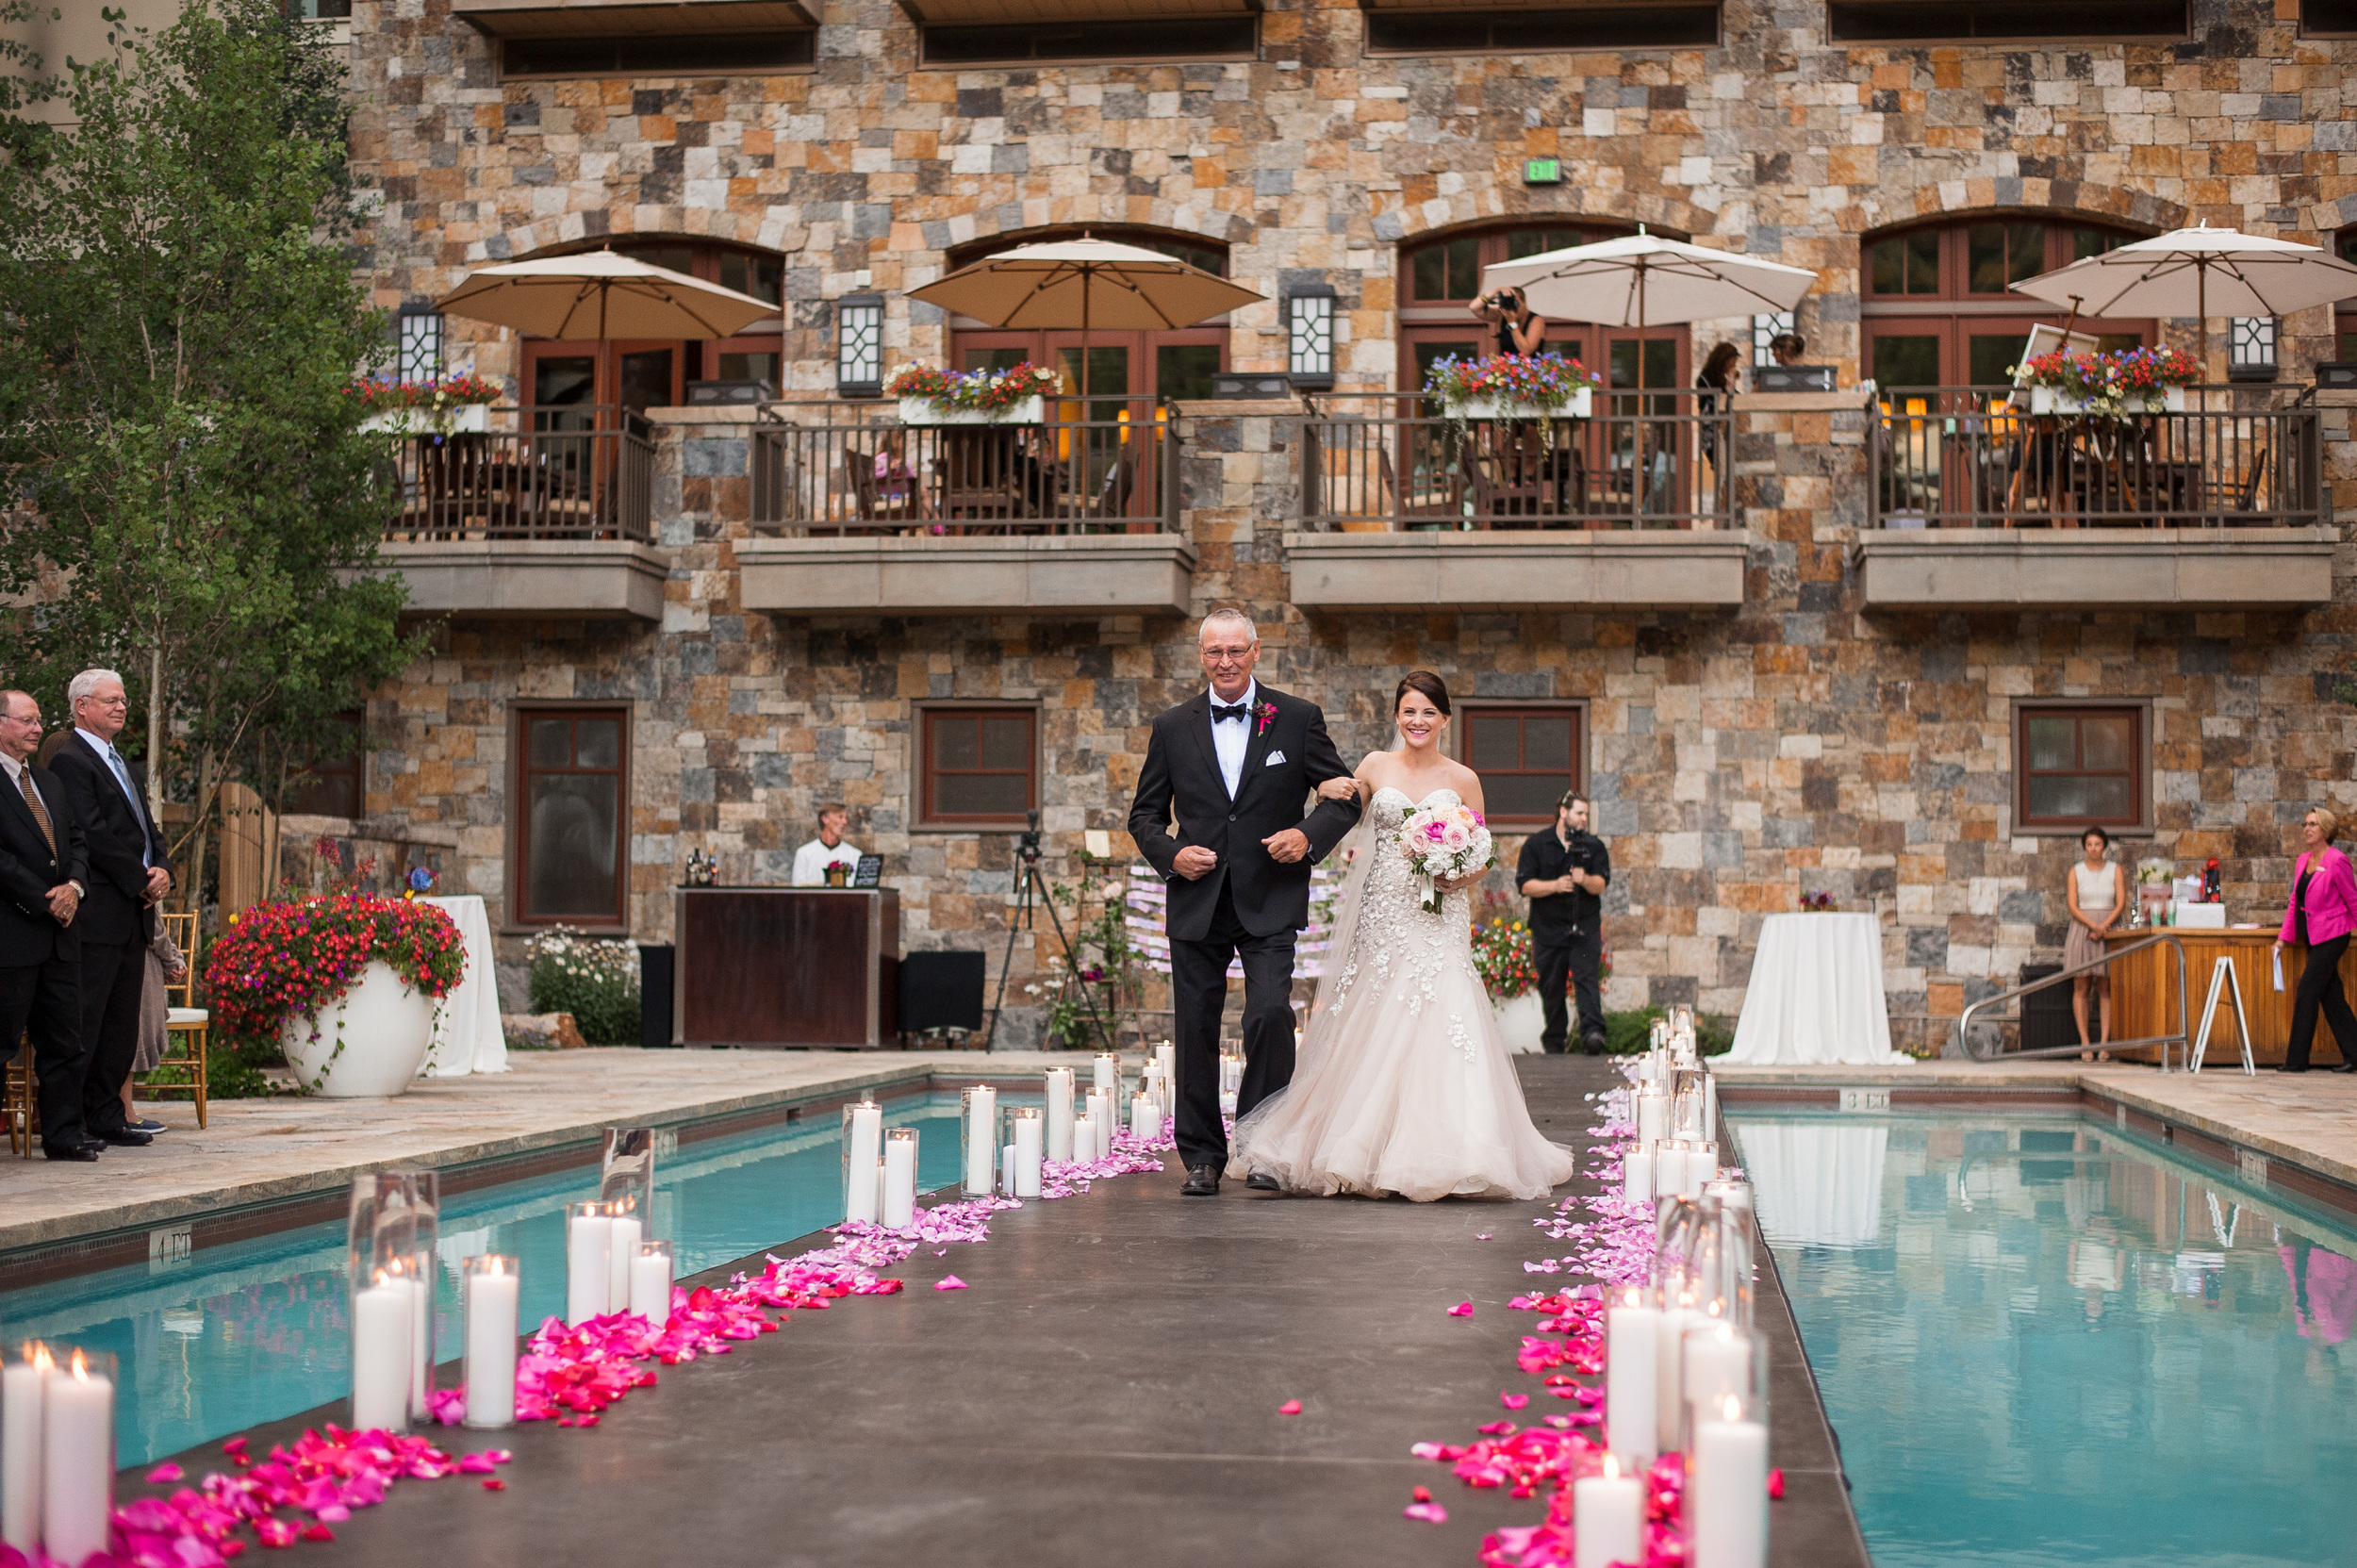  Jessica + Derek's wedding at the Four Seasons Vail | Gown by Liancarlo from Little White Dress Bridal Shop in Denver | Doug Treiber Photography 